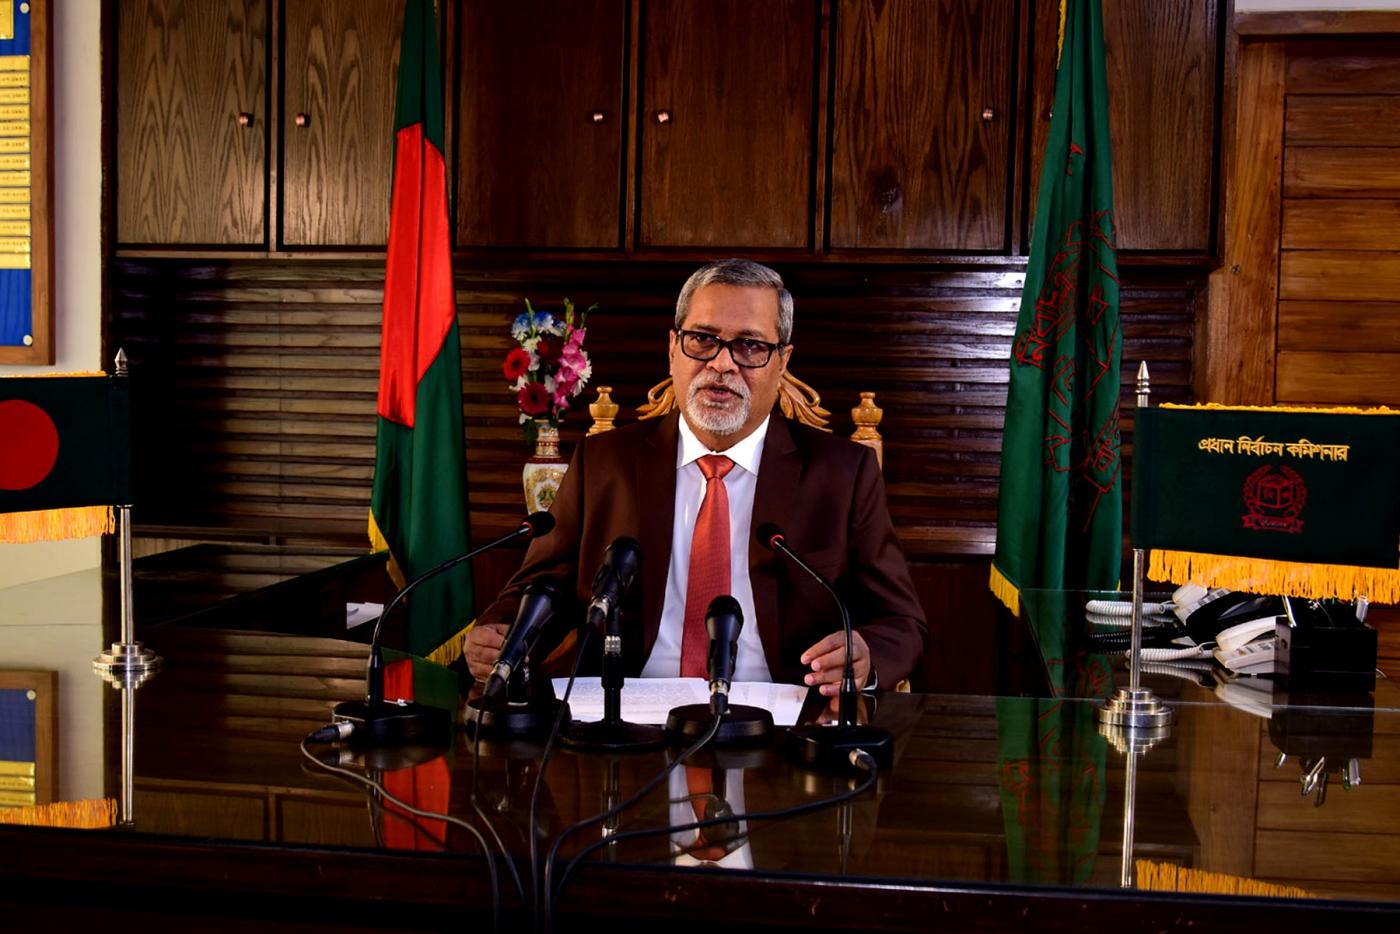 DHAKA, Nov. 8, 2018 (Xinhua) -- Bangladesh's Chief Election Commissioner KM Nurul Huda announces polls schedule in a televised speech to the nation from Dhaka, Bangladesh, on Nov. 8, 2018. Bangladesh's Chief Election Commissioner KM Nurul Huda said Thursday night that the country's 11th parliamentary elections will be held on Dec. 23. (Xinhua/Press Information Department/IANS) by .